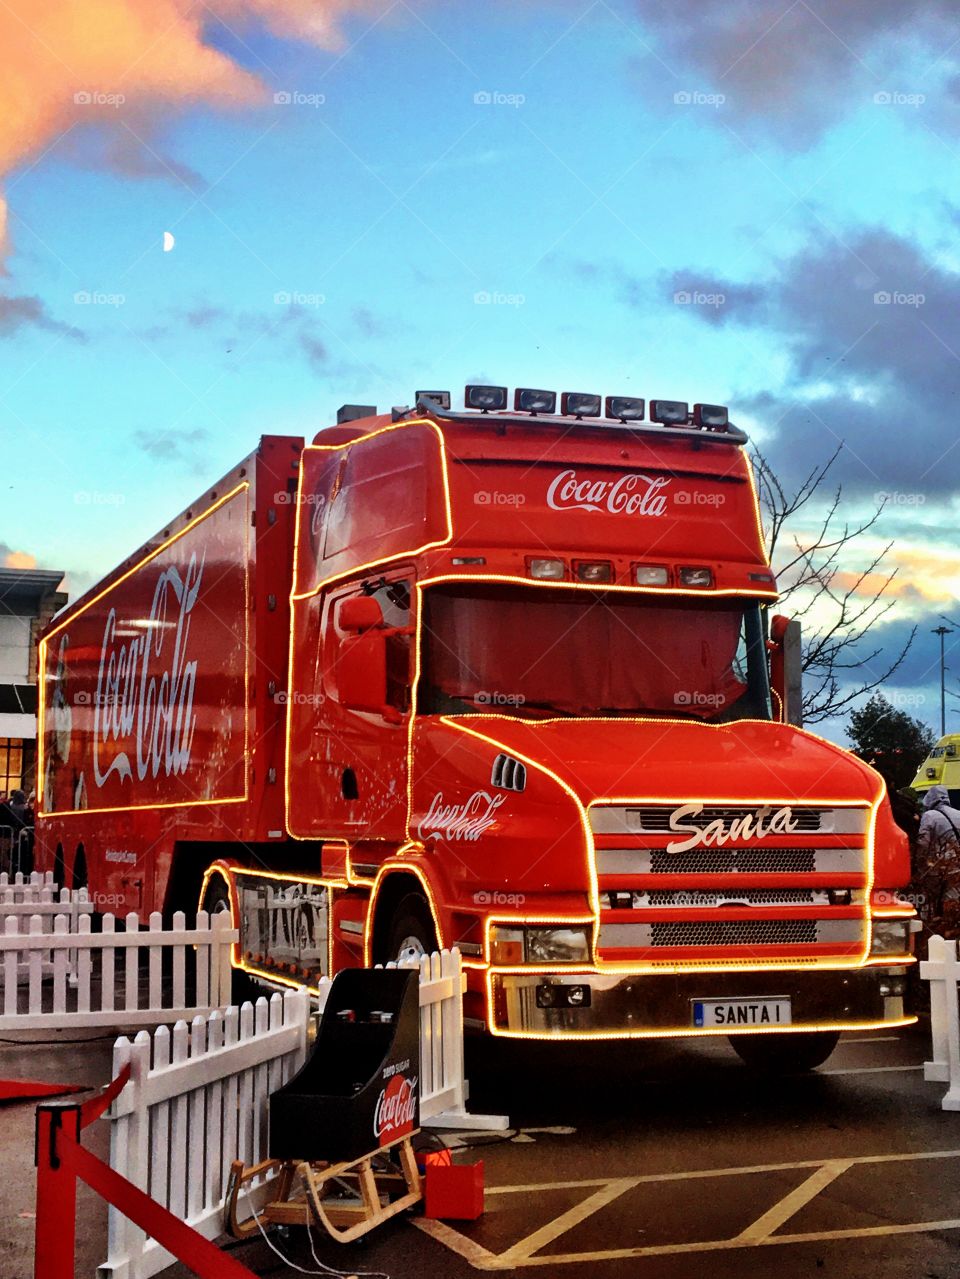 Coca Cola Christmas truck- Holidays are coming!